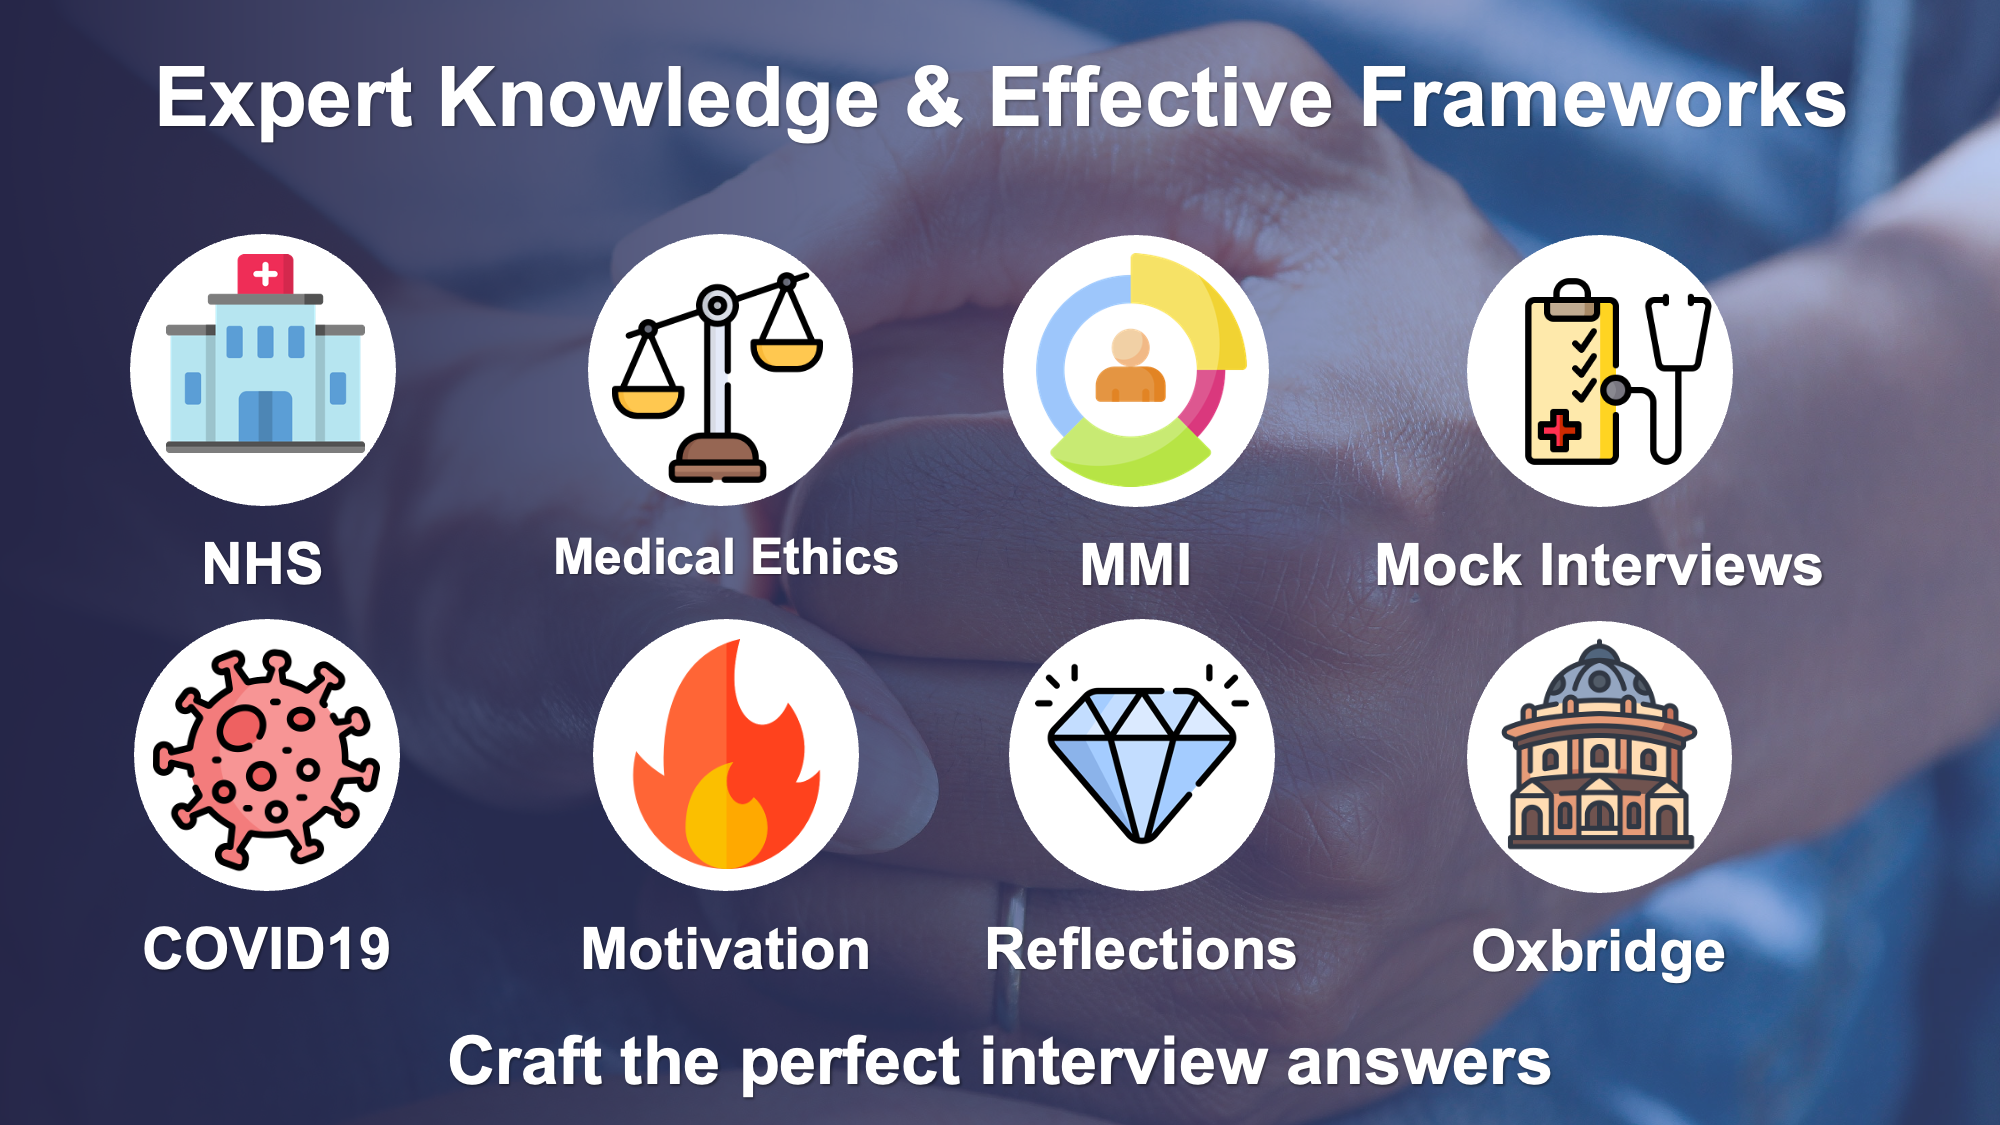 Expert knowledge and effective frameworks